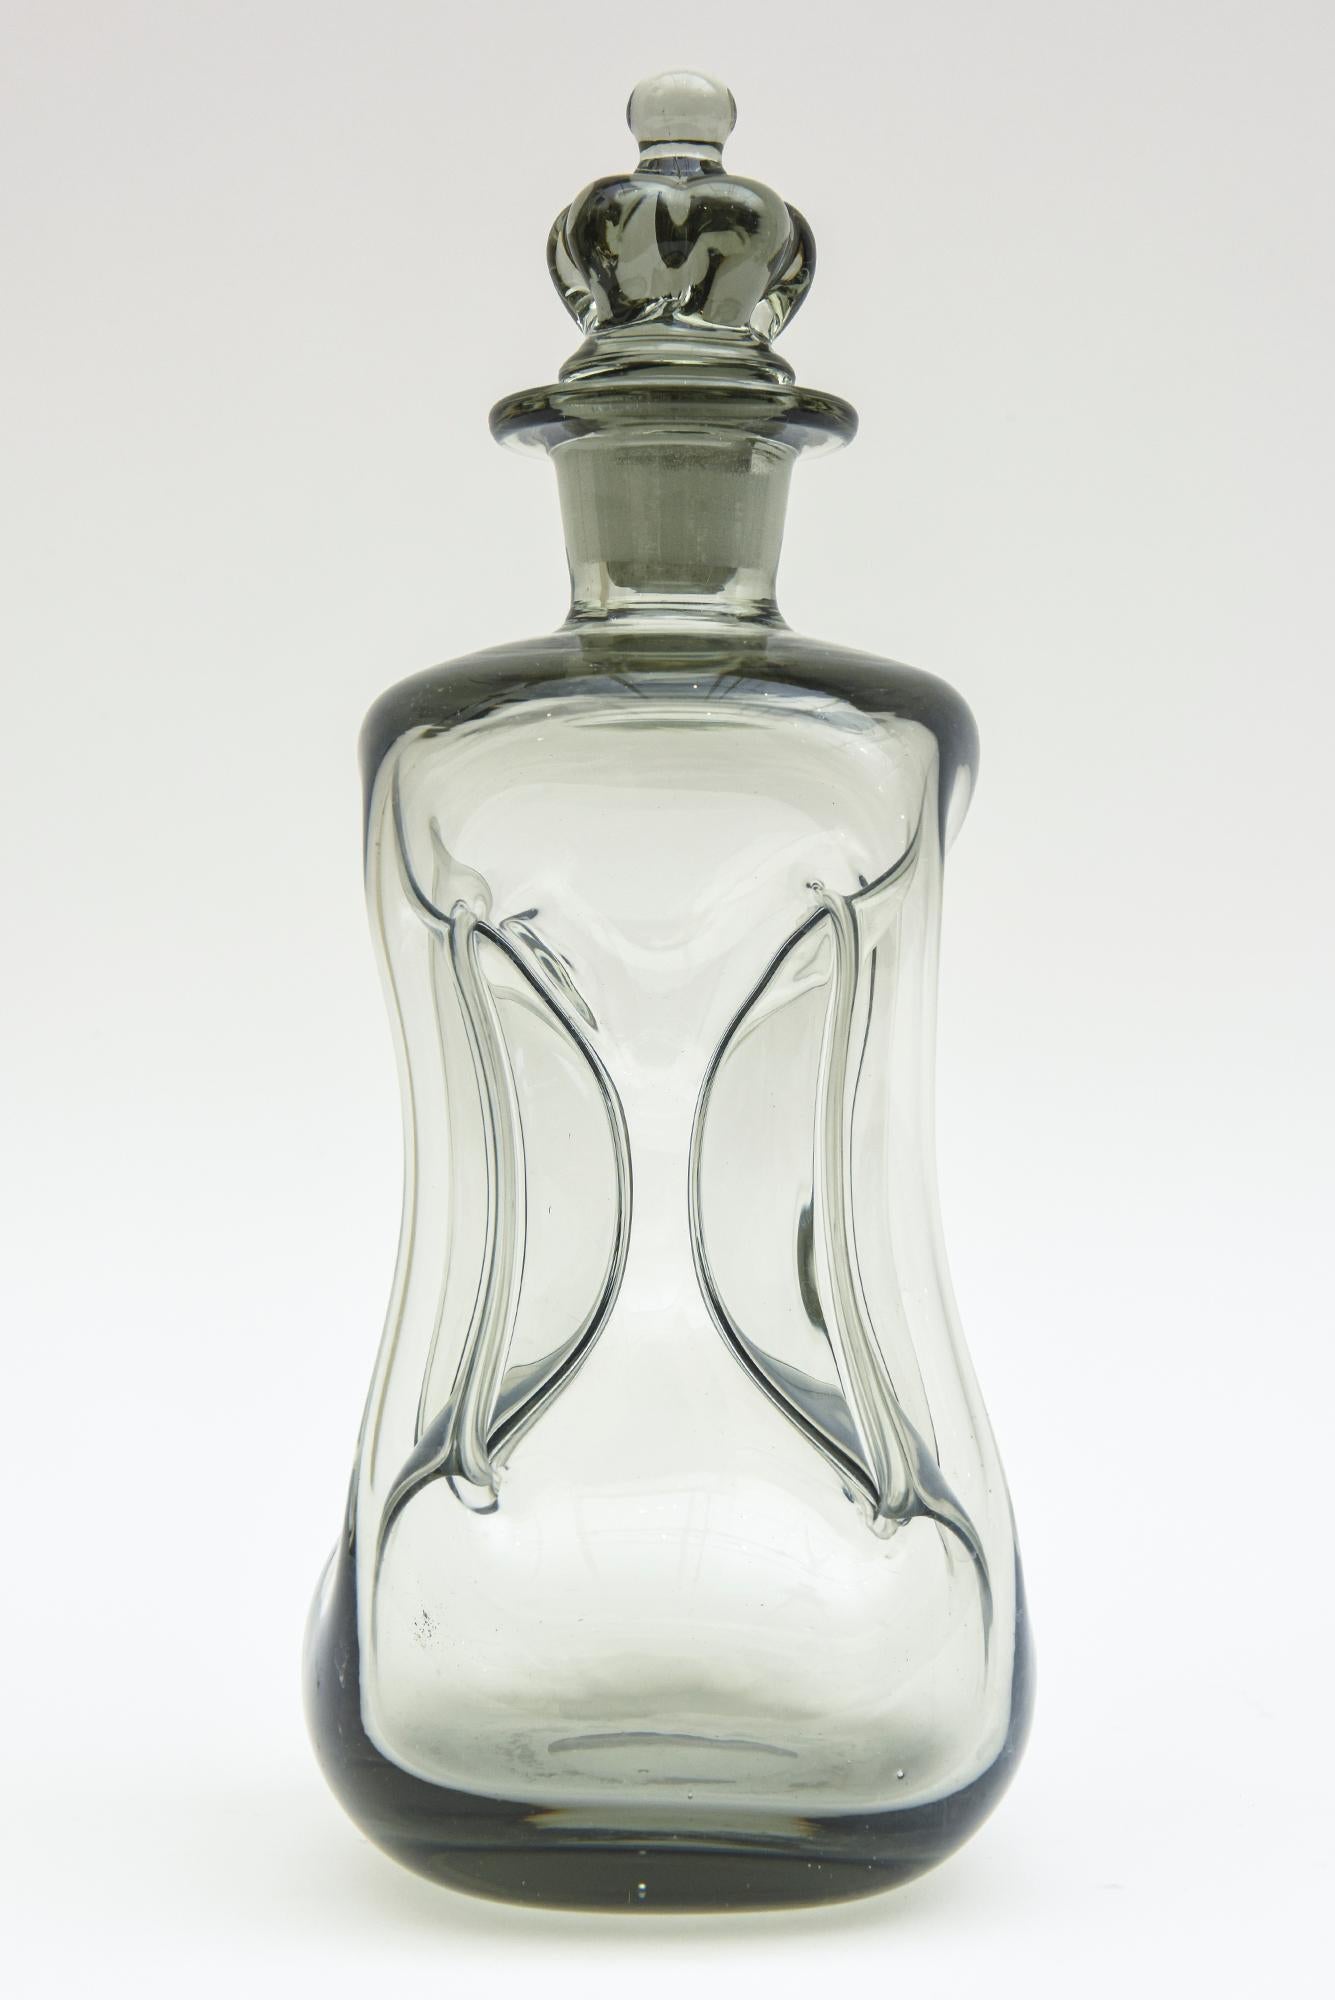 This vintage smokey gray gradient blown glass cinched decanter bottle was designed by Michael Bang for Holmegaard. It is called the Kluk Kluk. He was a major designer for the company. This is from the 1960s. What is most unusual about this is the